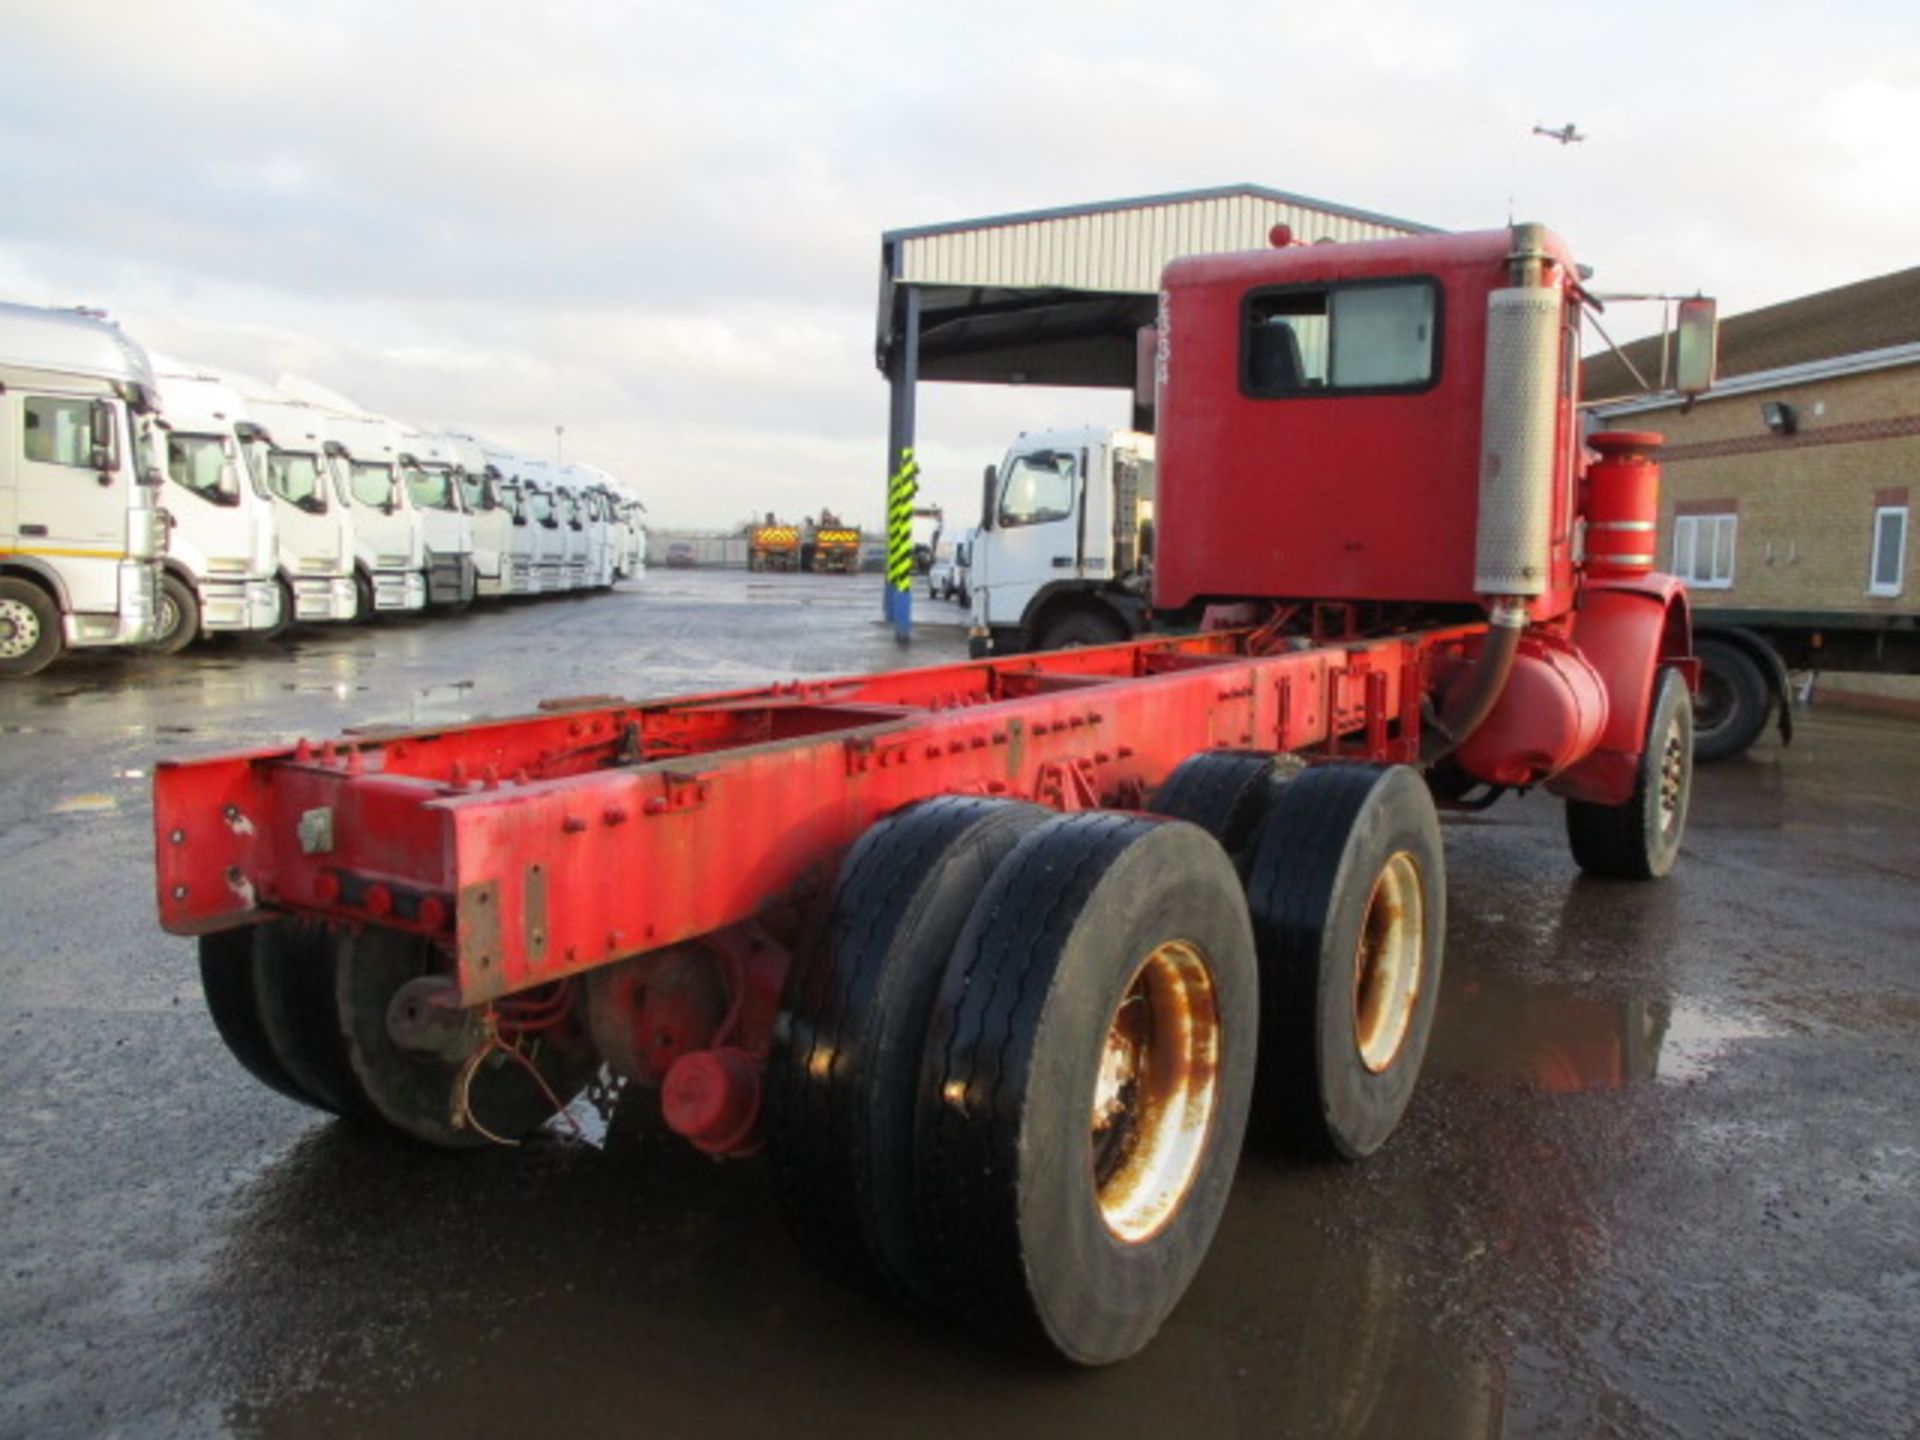 PETERBILT 357 Day Cab Diesel - VIN: 1XPAMA0X6TN409329 - Year: 1996 - 202,962 miles - 6x6 Chassis - Image 3 of 11